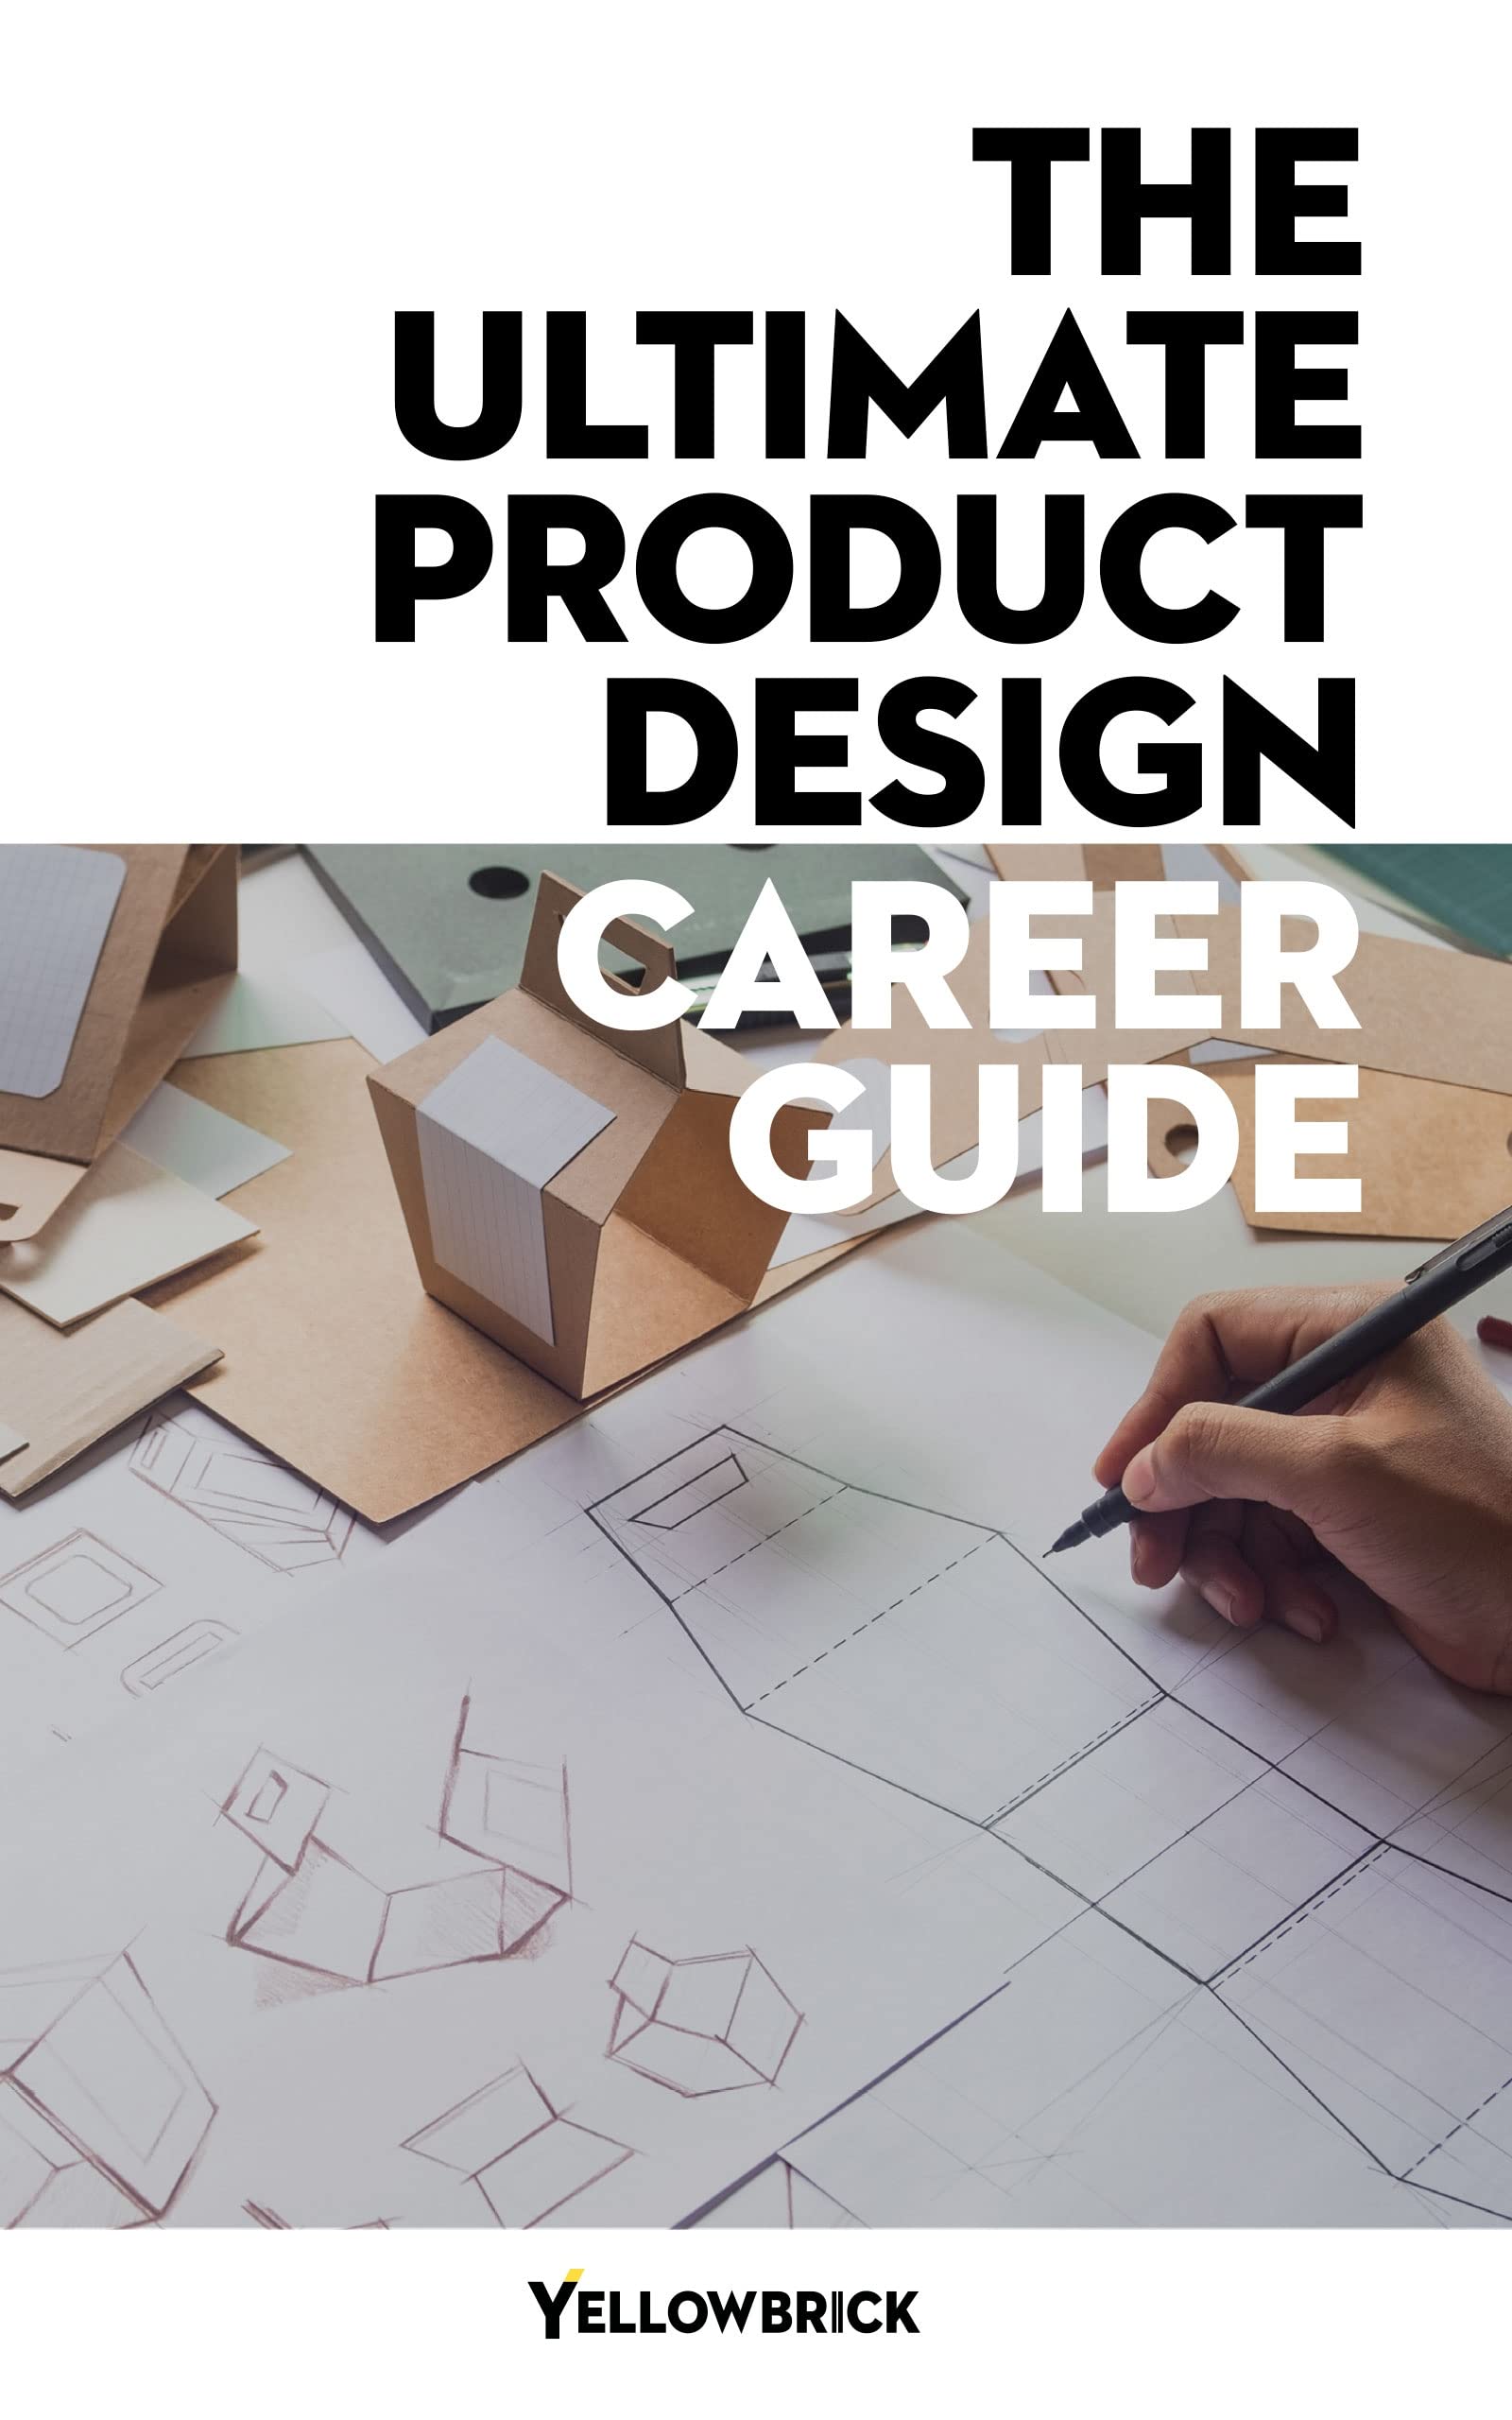 The Ultimate Product Design Career Guide: Understand product design opportunities available and the skills and qualifications you need to succeed. (Yellowbrick.co Career Guides)